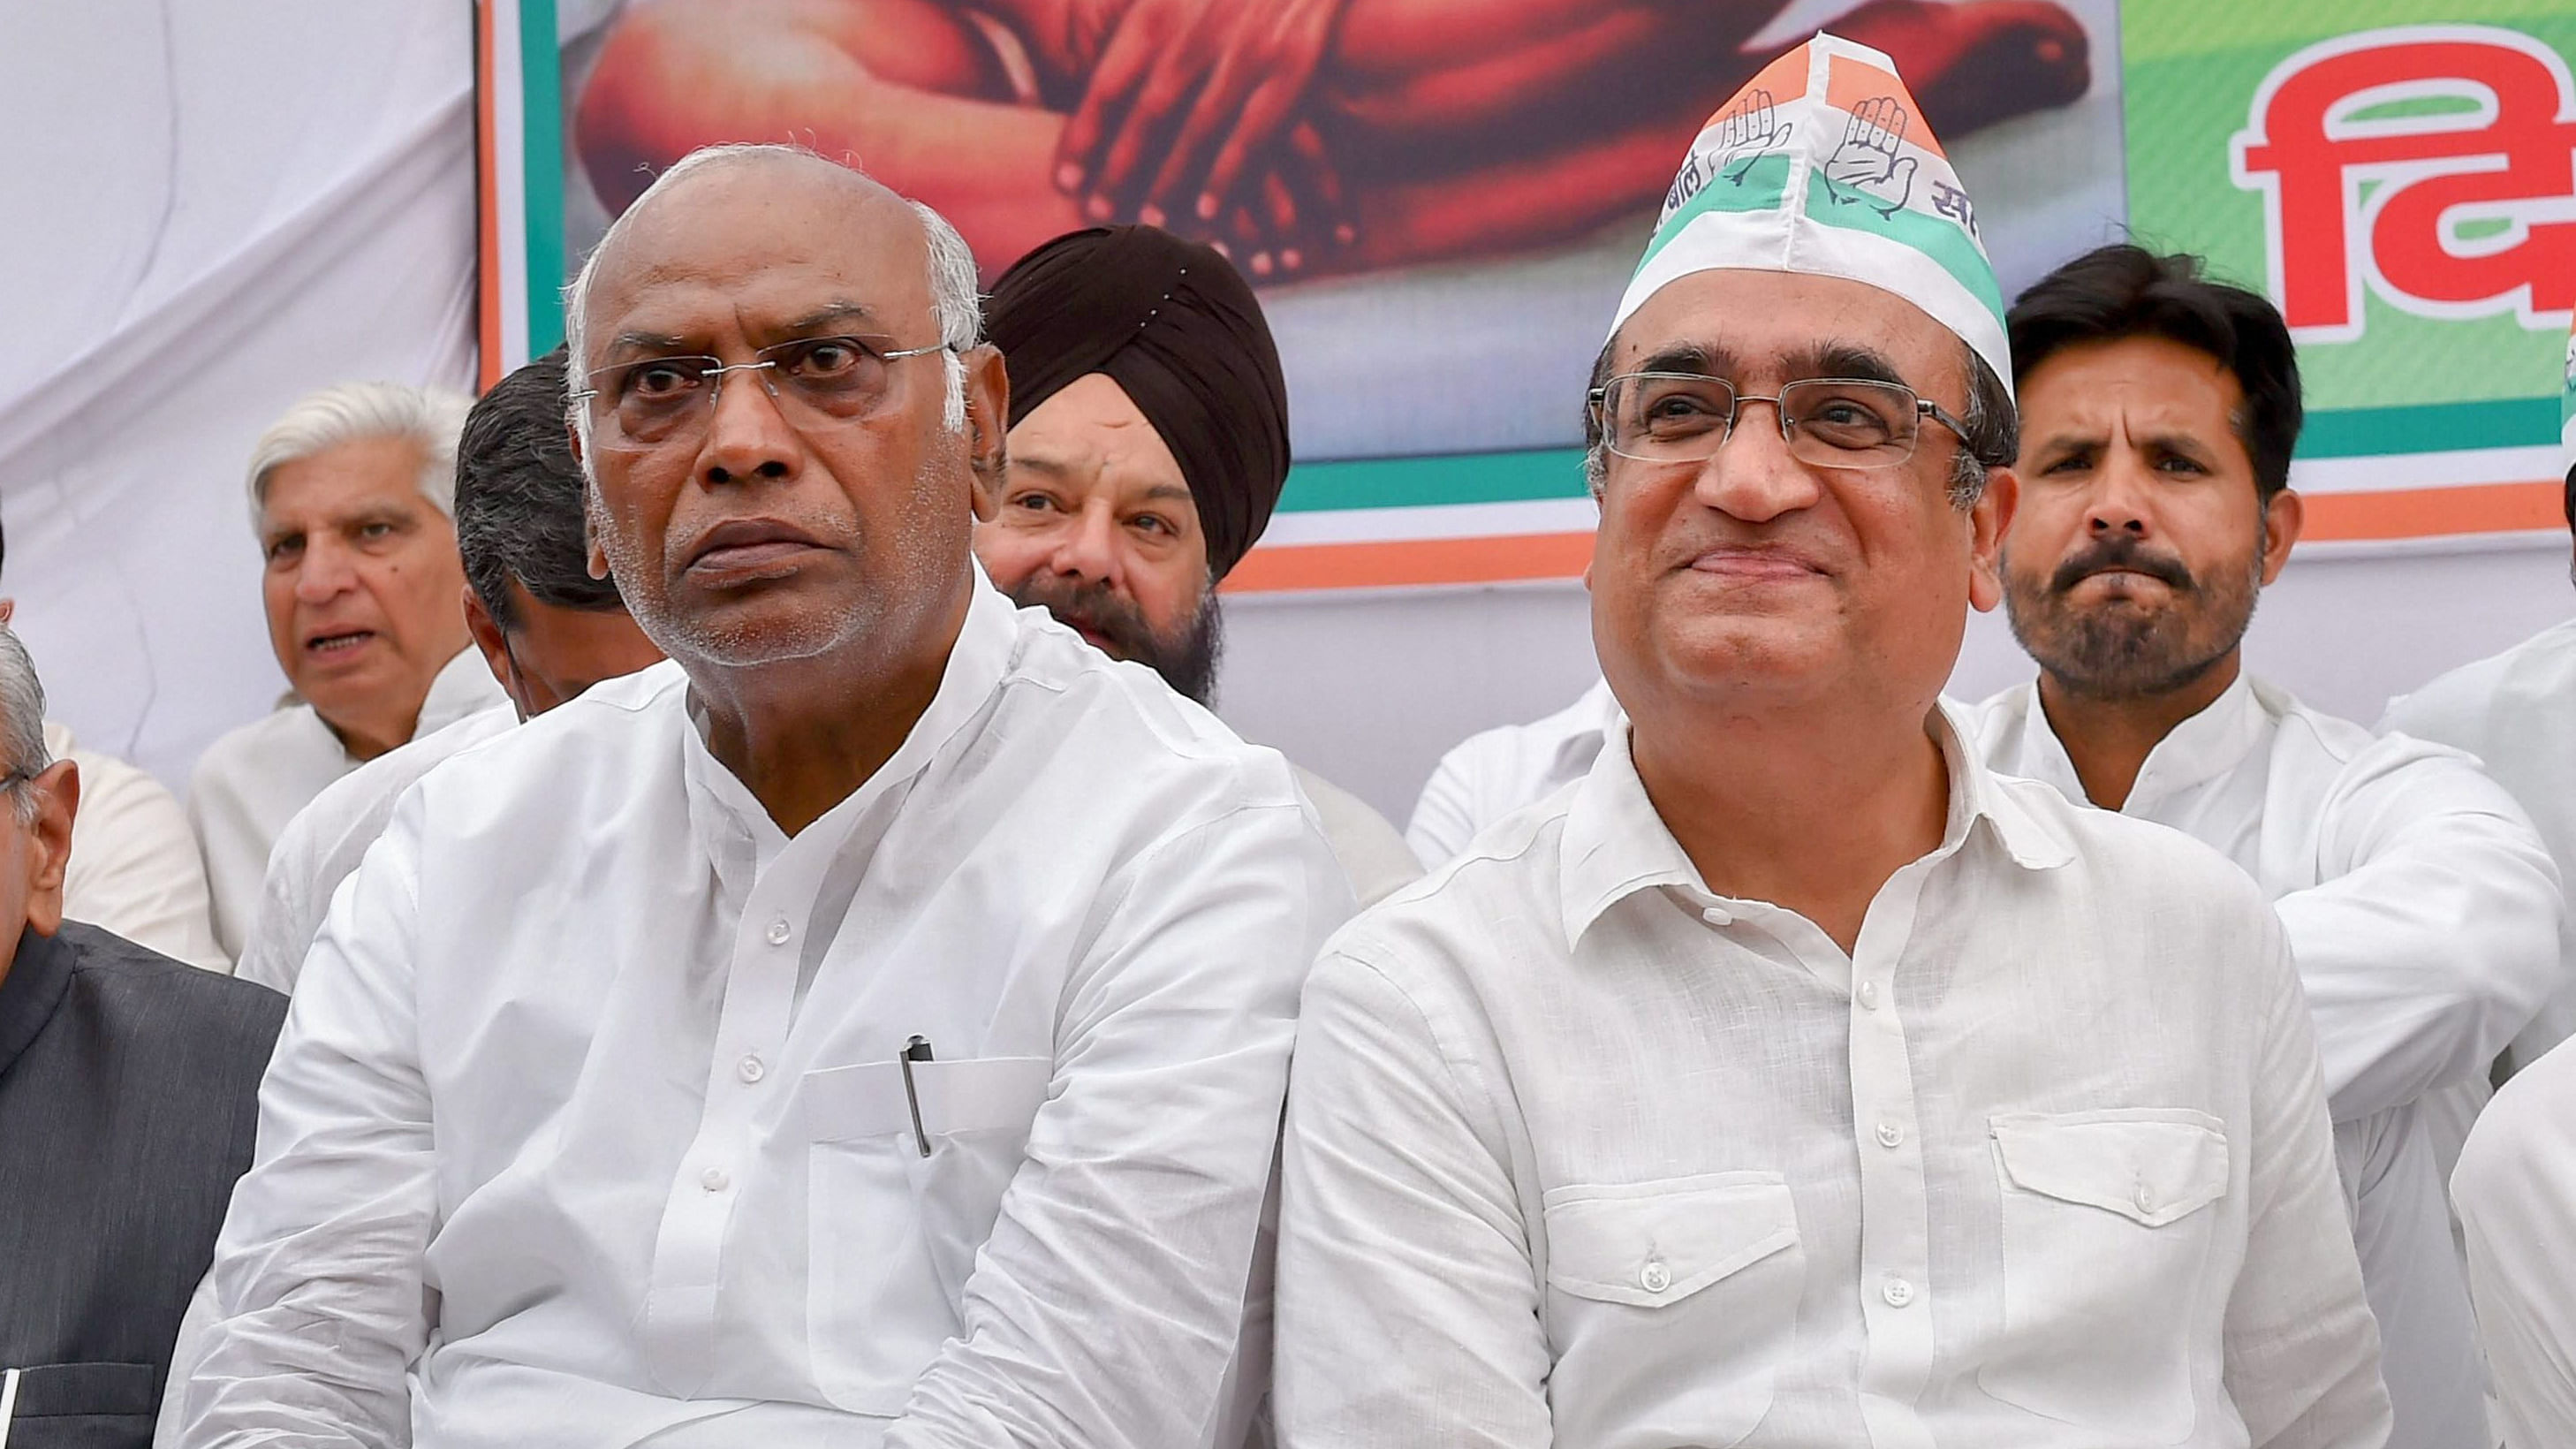 Party sources said 82 MLAs loyal to Gehlot, who had submitted resignation letters on Sunday over a possible move to appoint Pilot as the next chief minister, are likely to hold a meeting on Monday to decide their next course of action. The Congress has 108 MLAs in the House of 200. Credit: PTI Photo